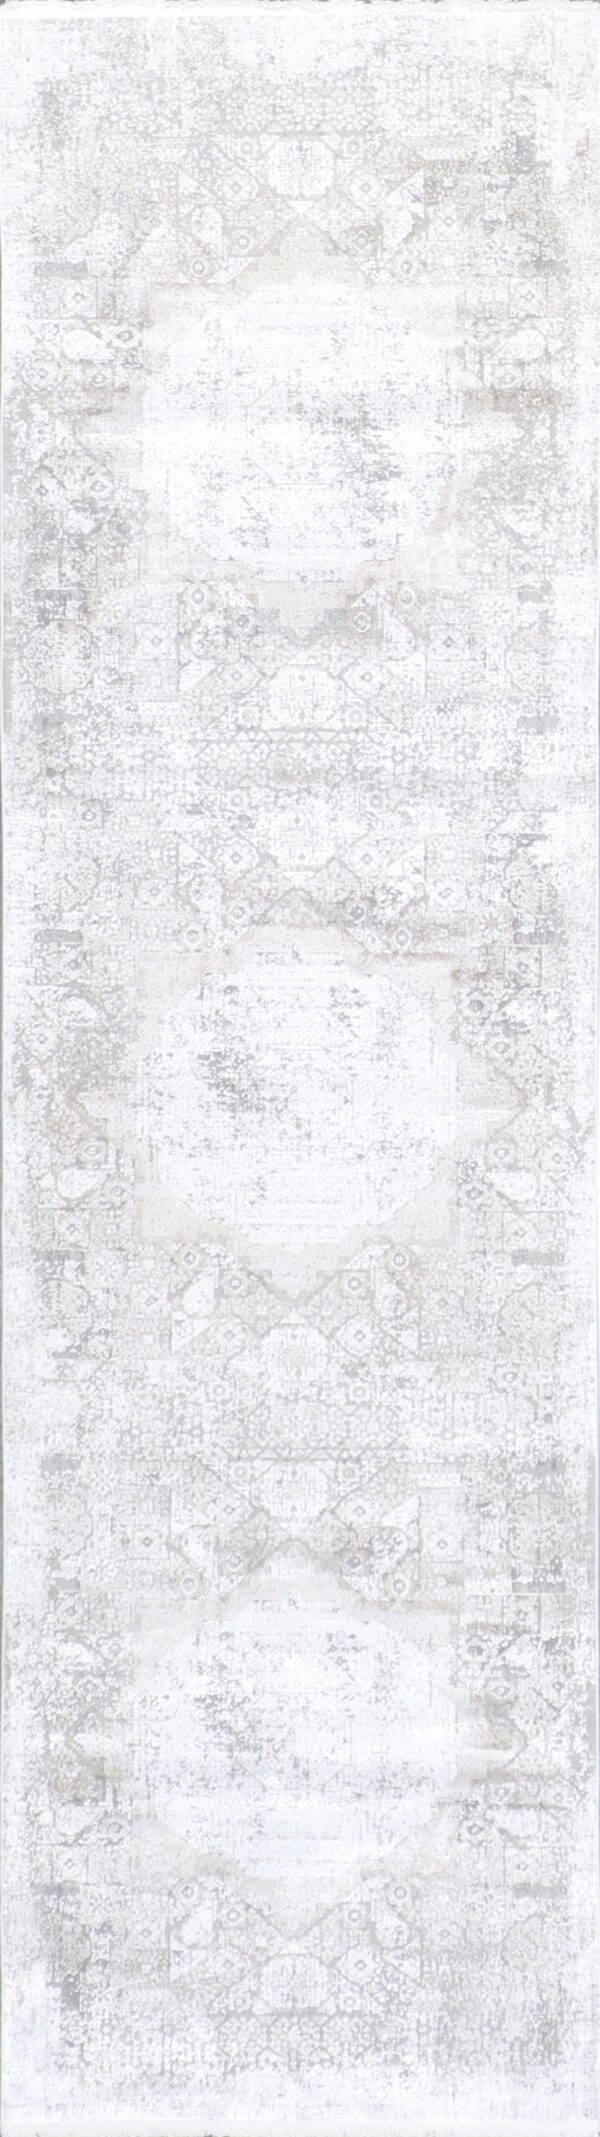 2’7”x9’8” Transitional Ivory Wool & Silk Hand-Finished Rug - Direct Rug Import | Rugs in Chicago, Indiana,South Bend,Granger